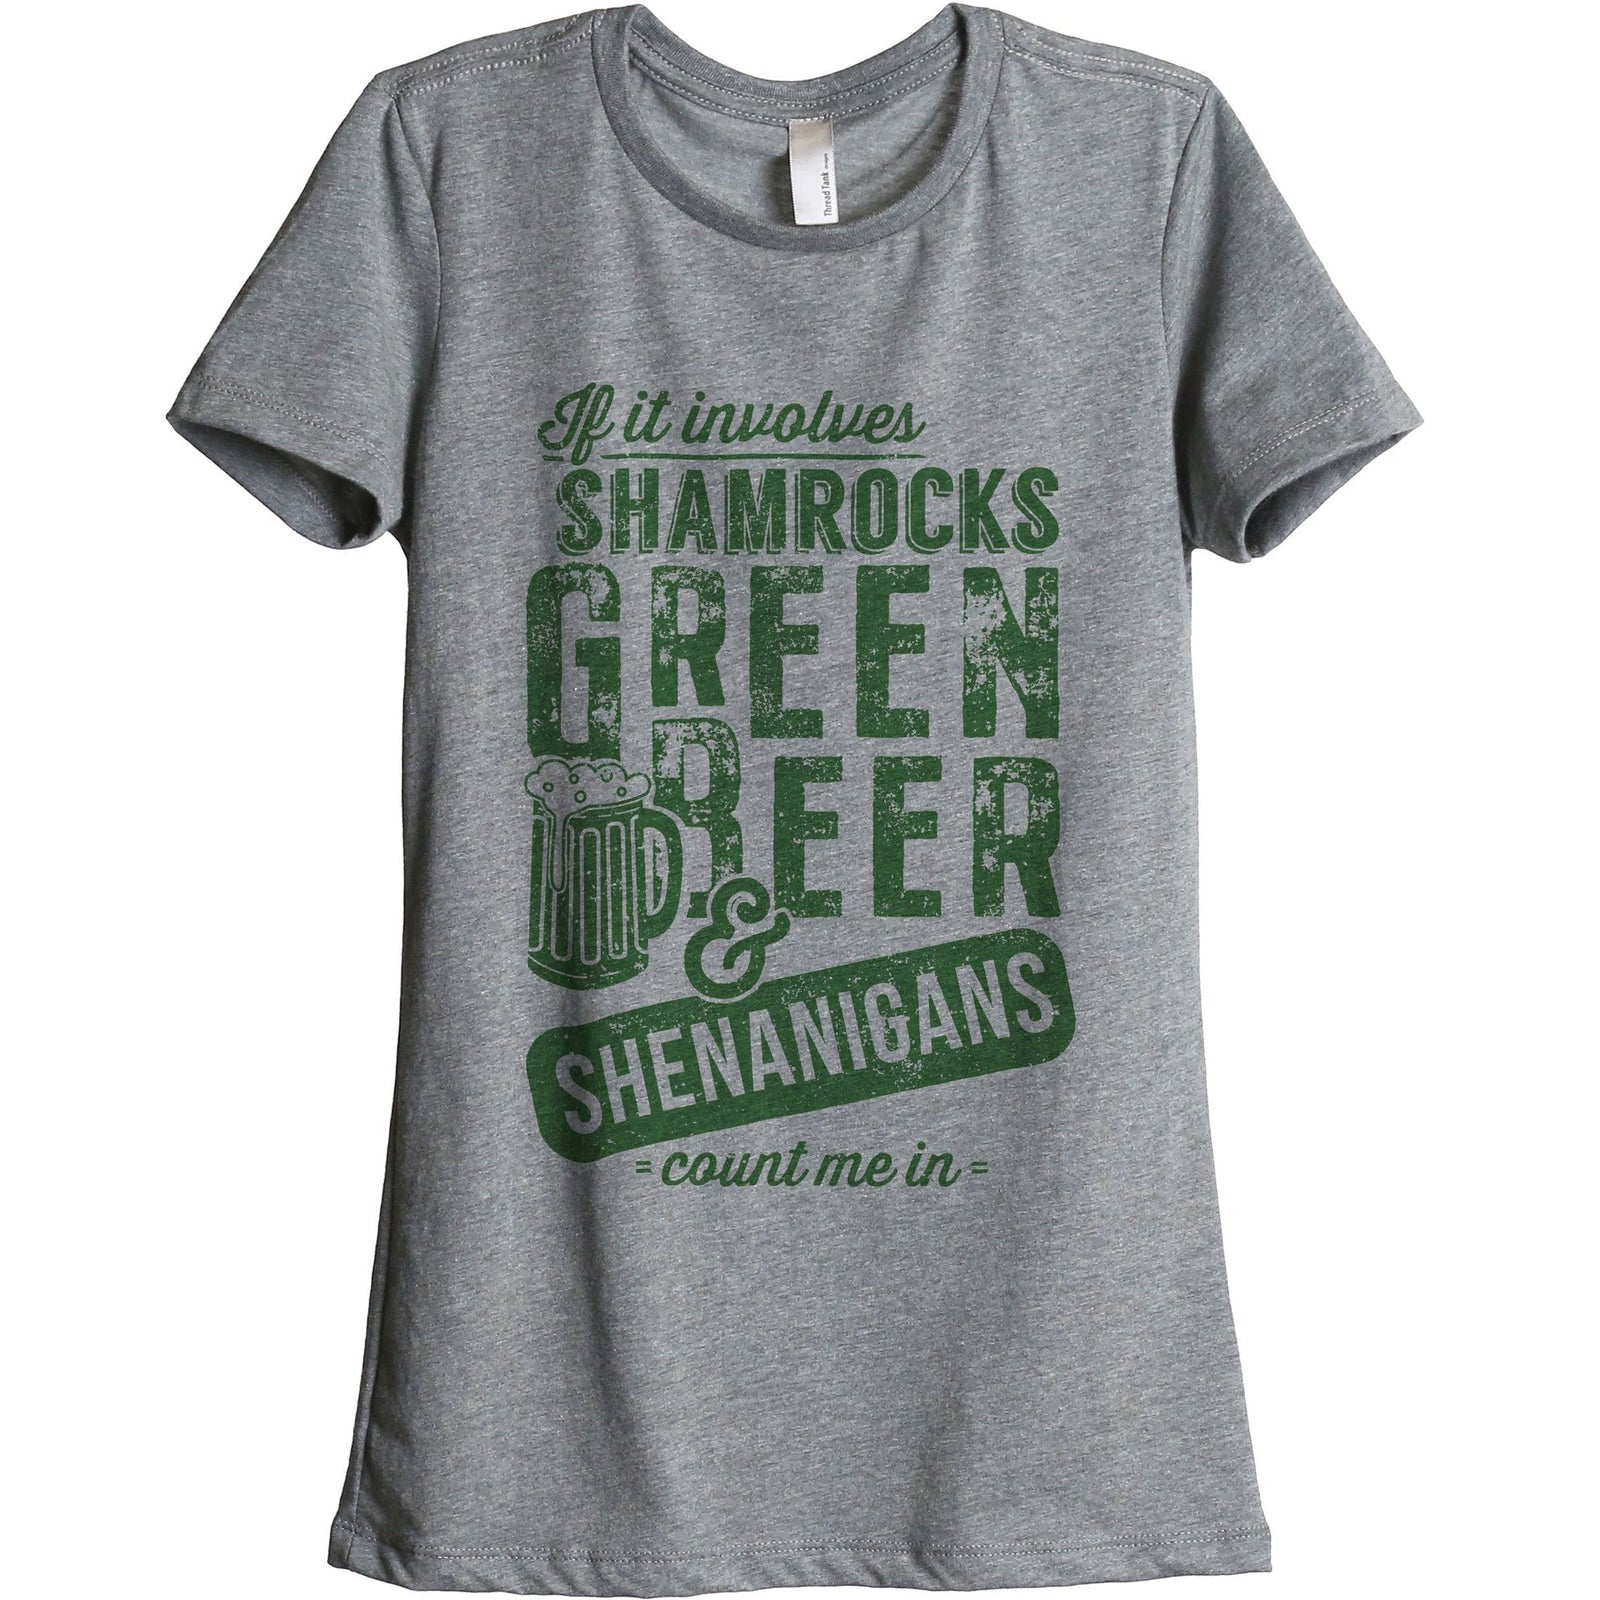 Shamrocks Green Beer And Shenanigans - Stories You Can Wear